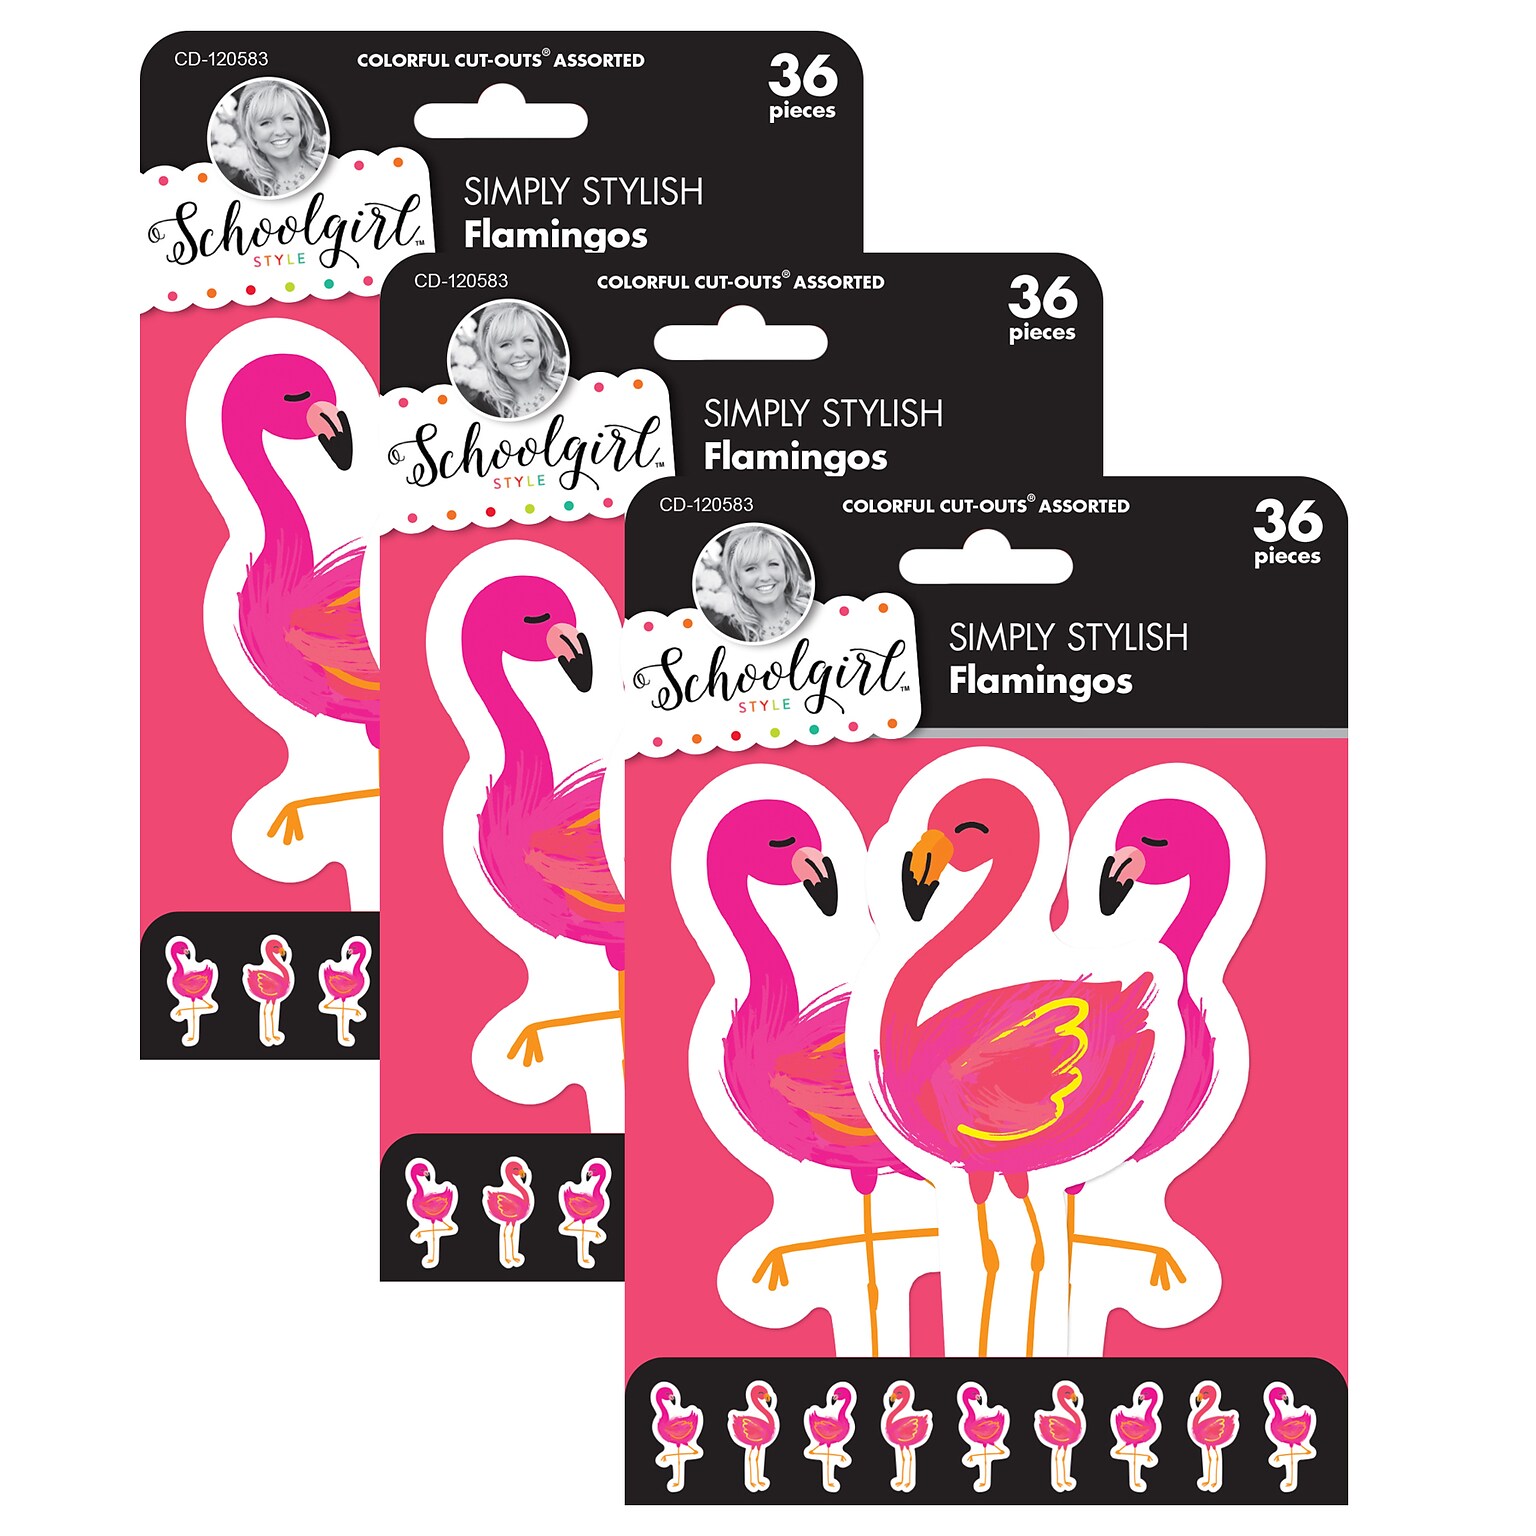 Schoolgirl Style™ Simply Stylish Tropical Flamingos Cut-Outs, 36 Per Pack, 3 Packs (CD-120583-3)